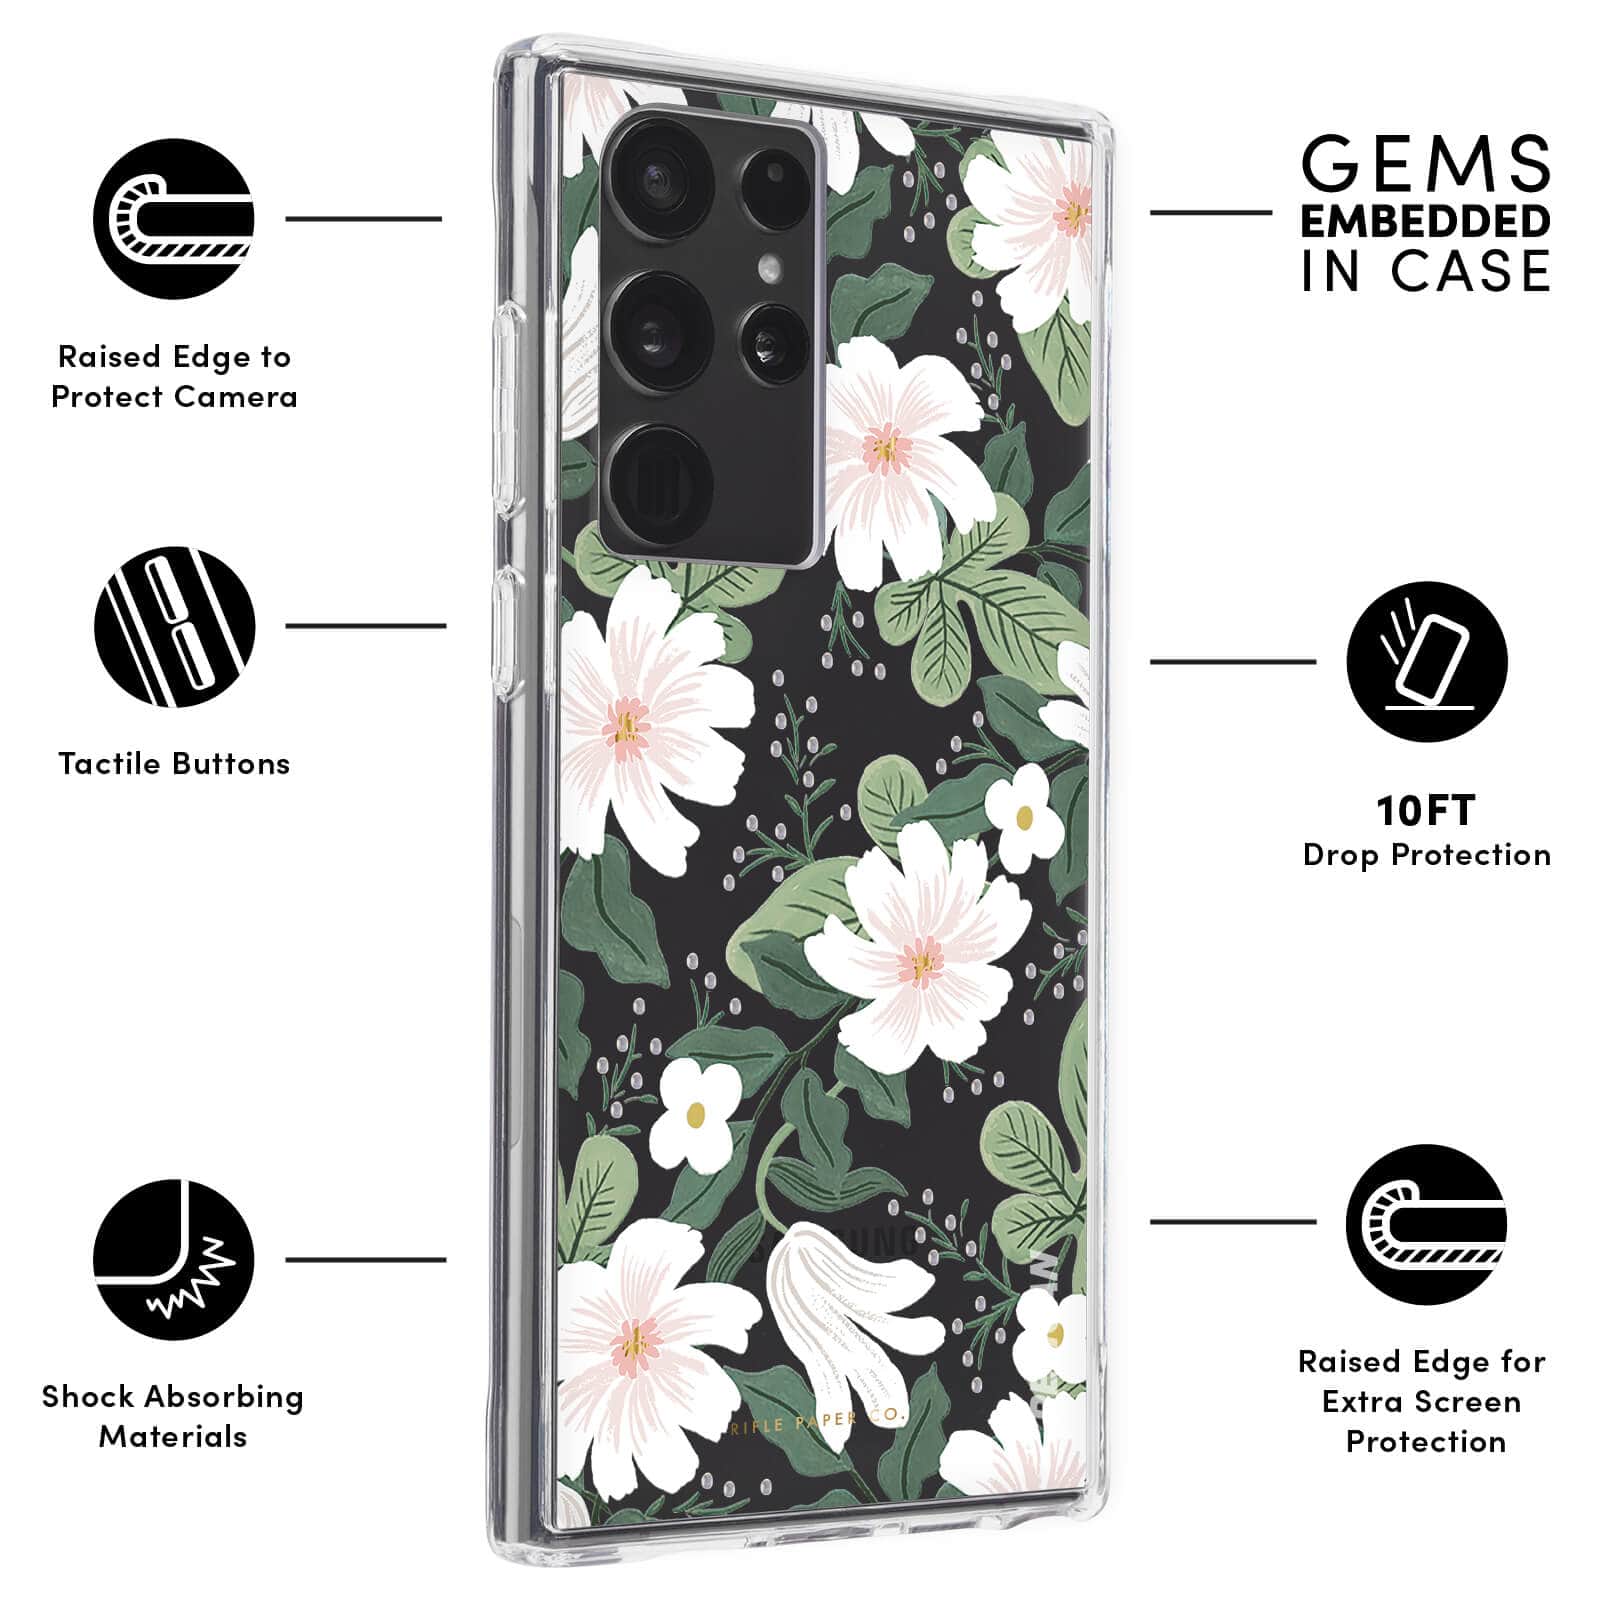 RAISED EDGE TO PROTECT CAMERA, TACTILE BUTTONS, SHOCK ABSORBING MATERIALS, GEMS EMBEDDED IN CASE, 10FT DROP PROTECTION, RAISED EDGE FOR EXTRA SCREEN PROTECTION. COLOR::WILLOW